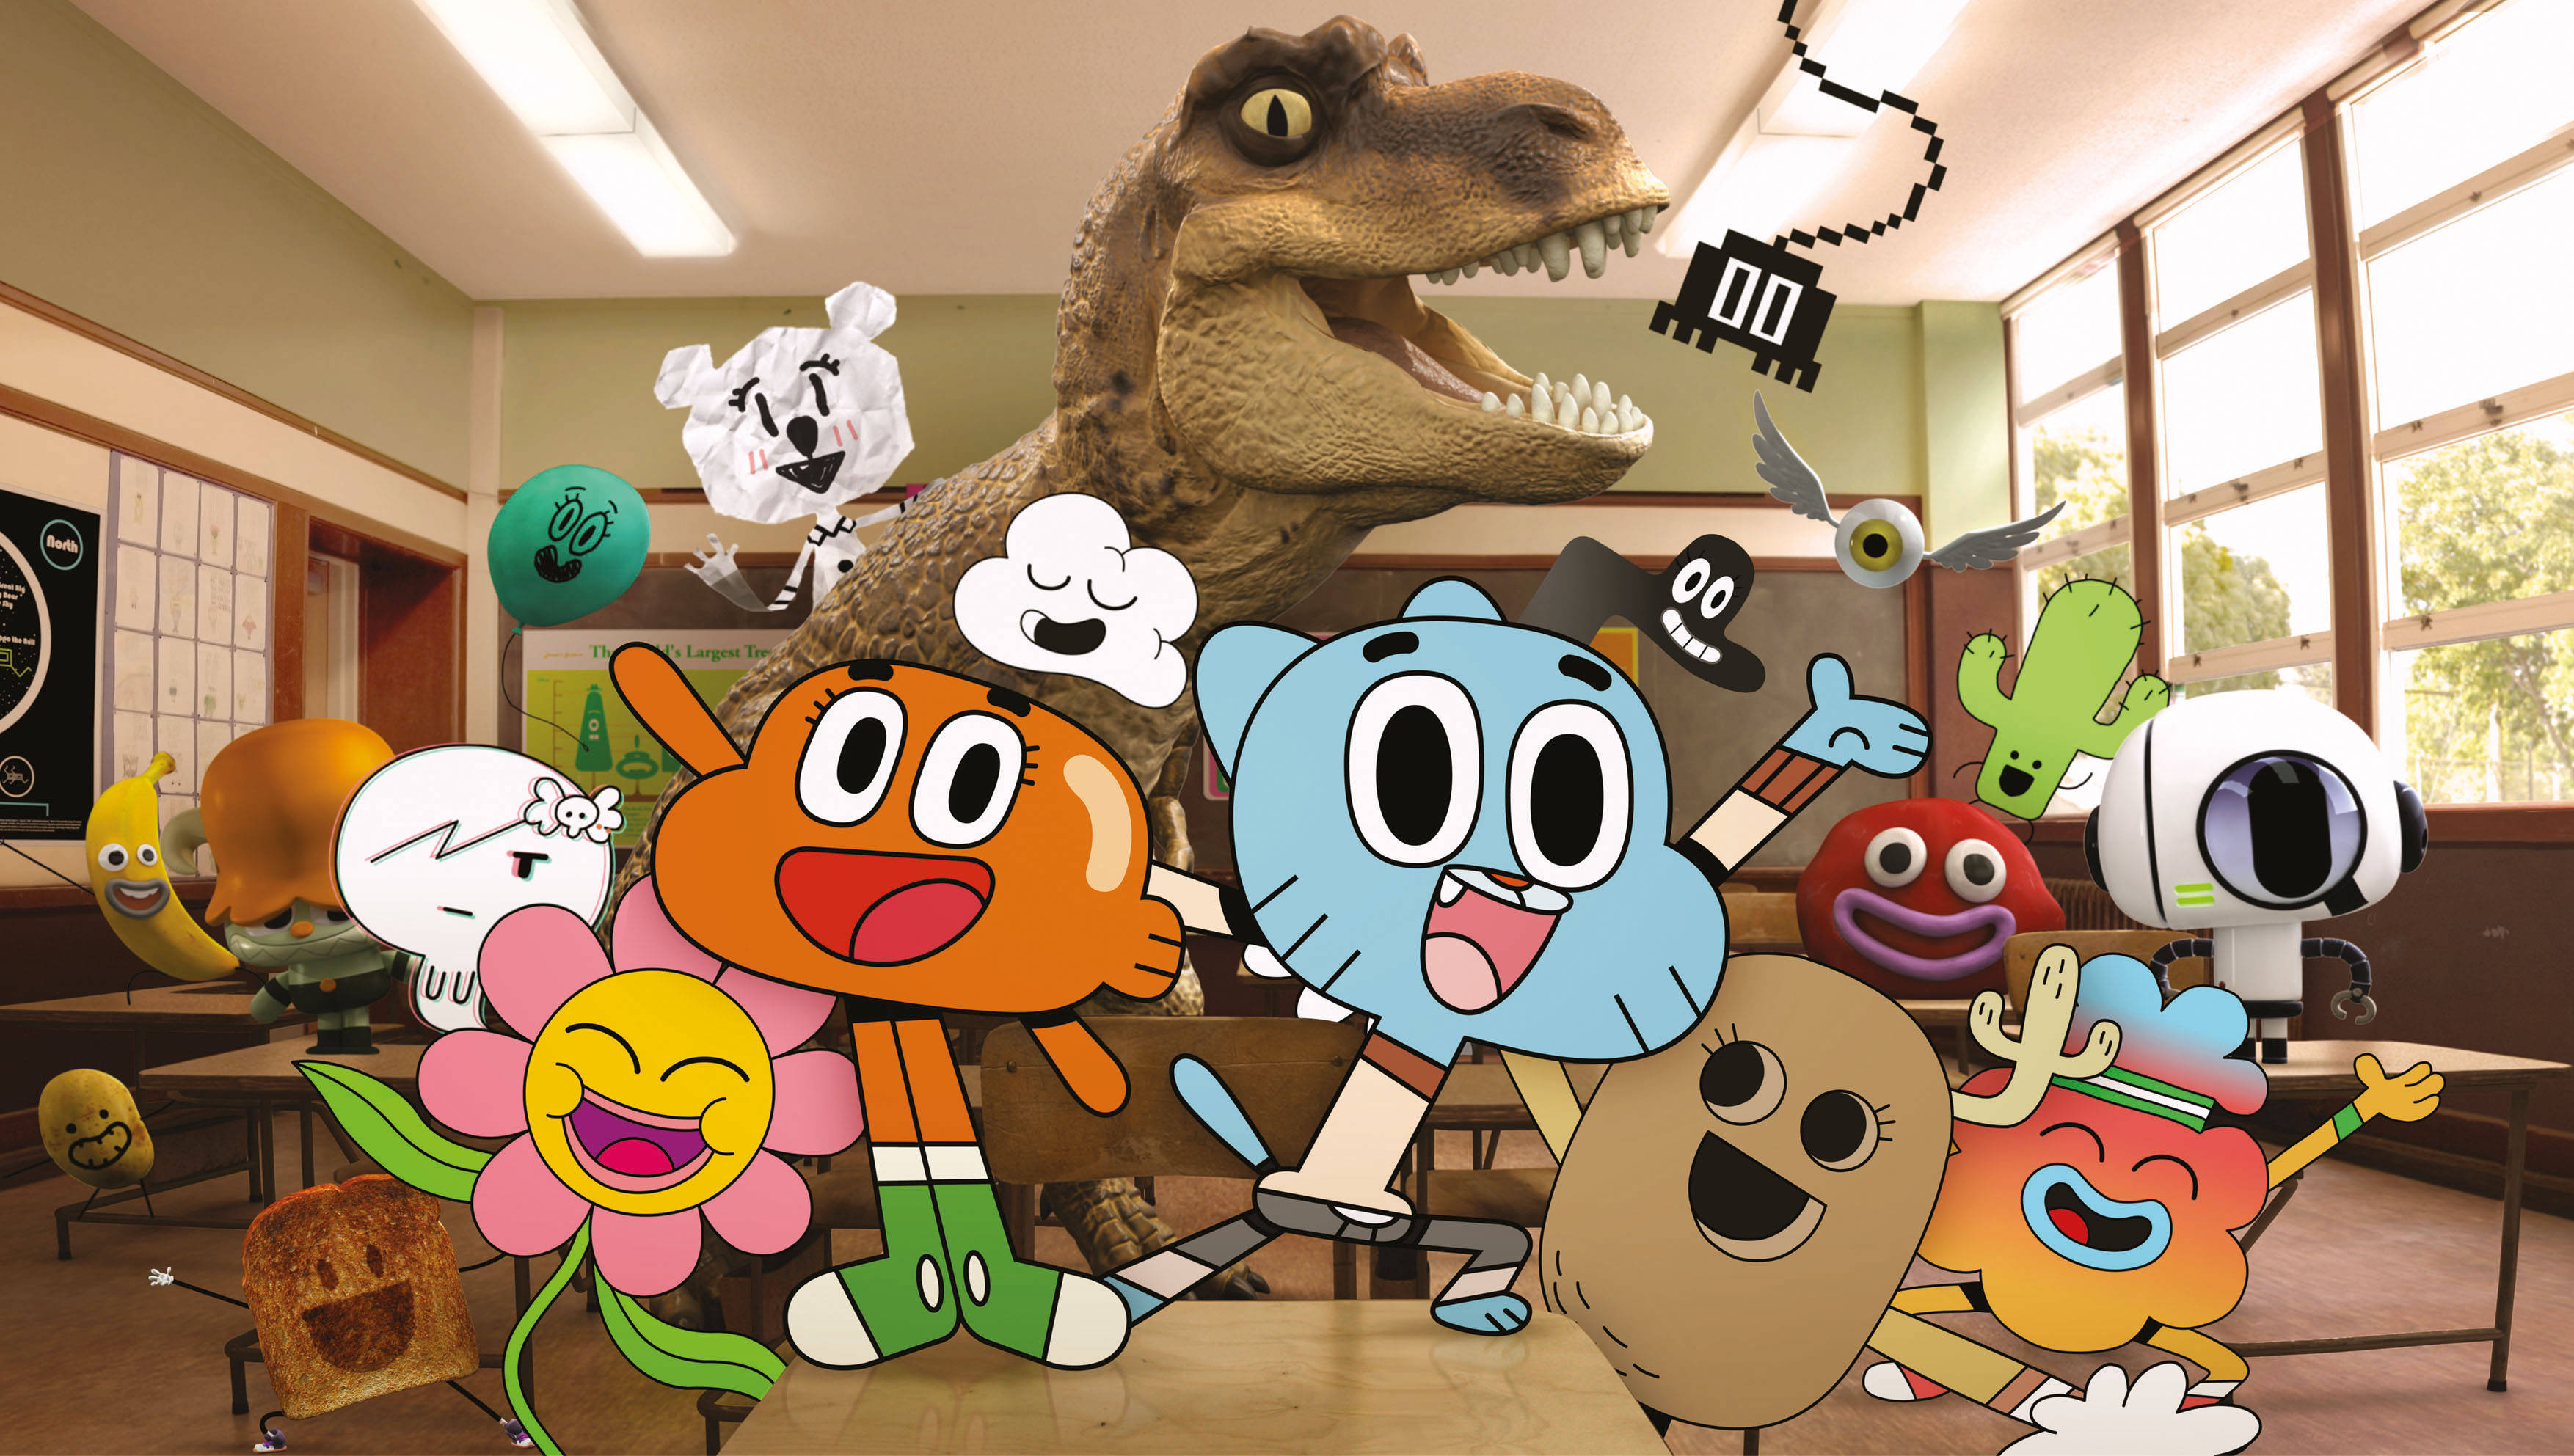 10 Things You Need to Know About The Amazing World Of Gumball!